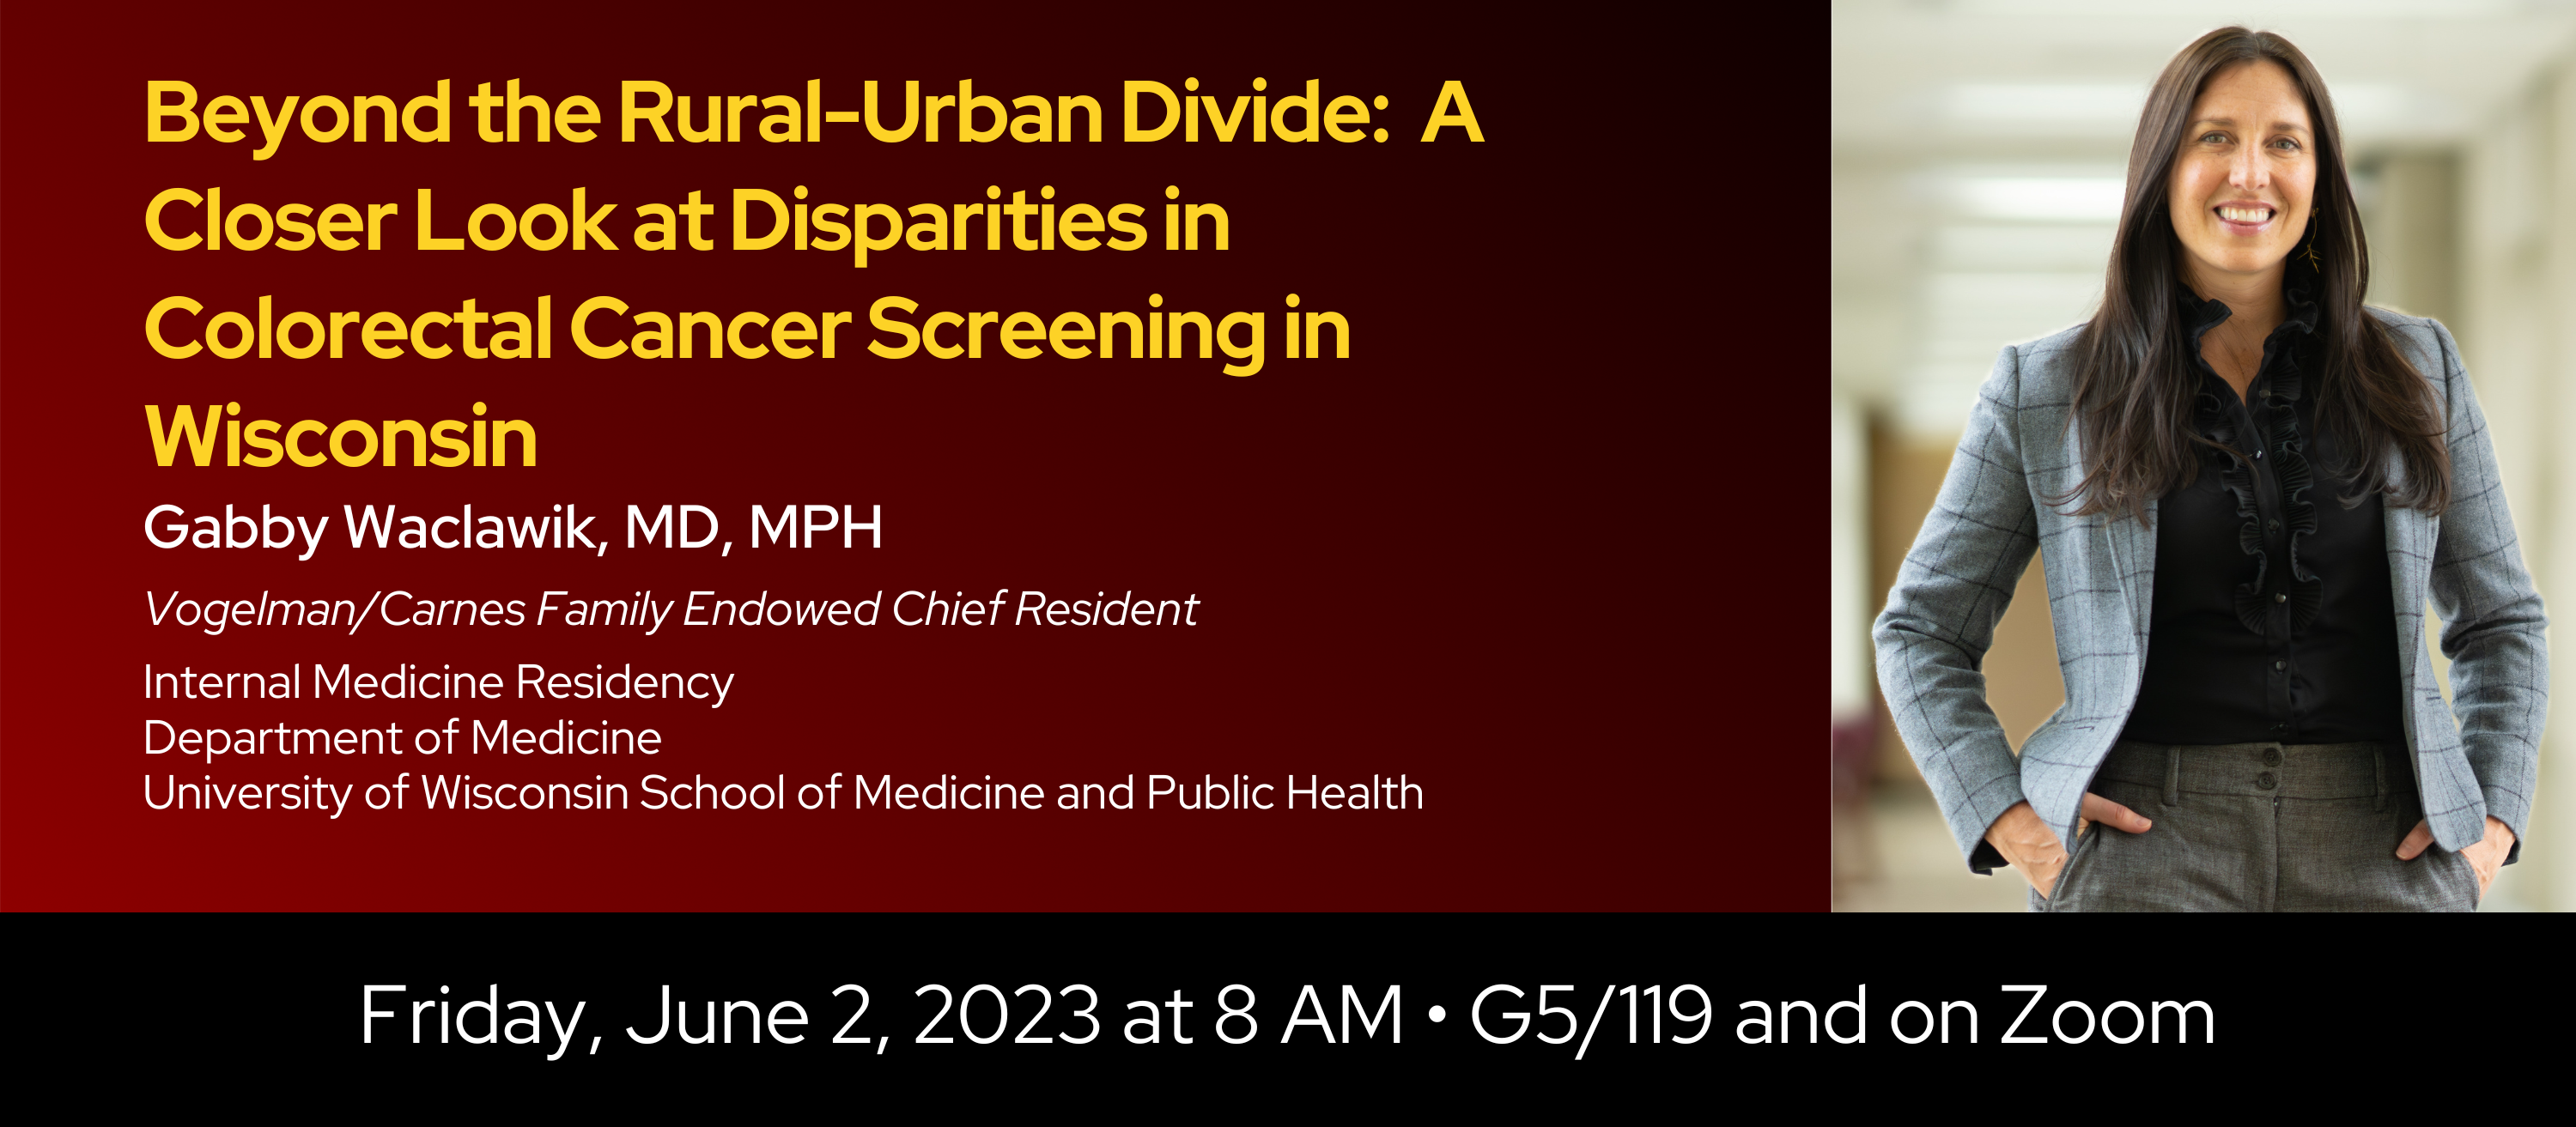 Title: Beyond the Rural-Urban Divide: A Closer Look at Disparities in Colorectal Cancer Screening In Wisconsin